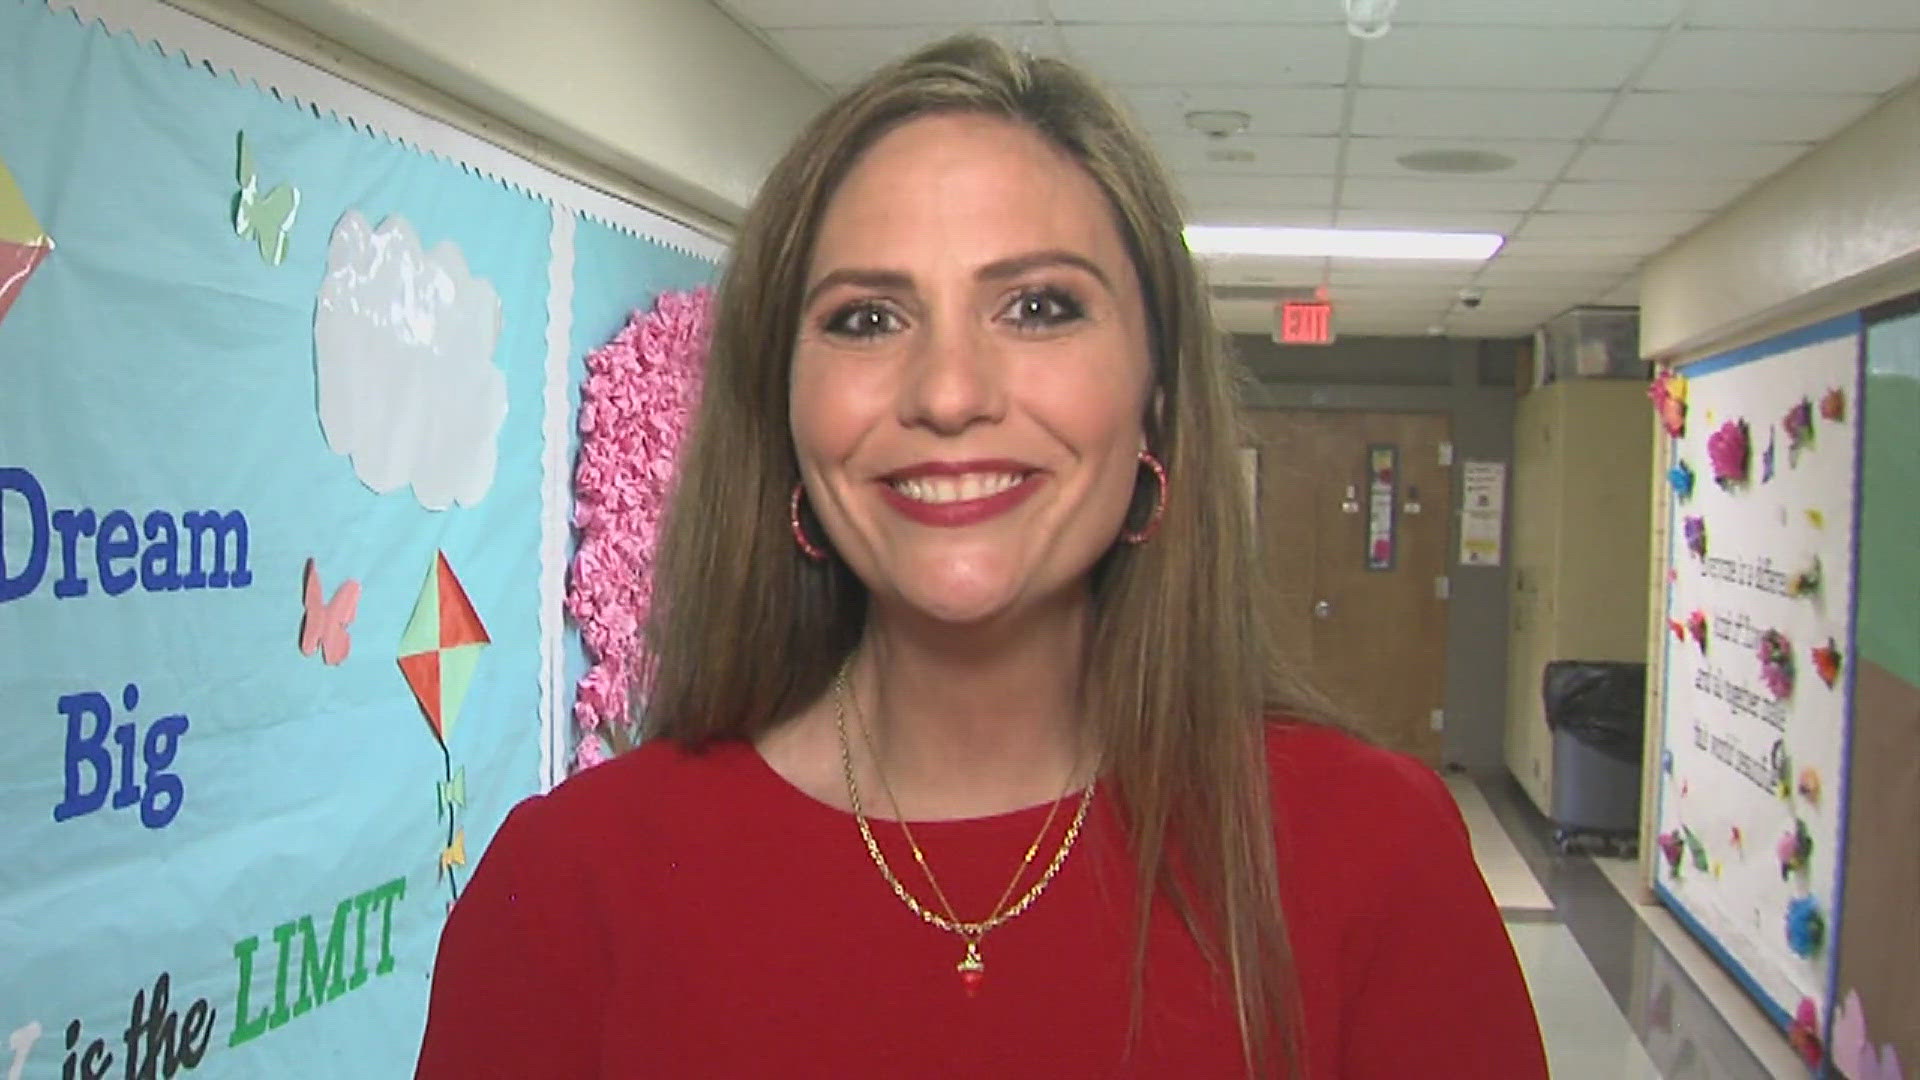 Golden Apple award winner Stacy Webb, who teaches drama at Vidor High School, has been changing lives for more than two decades.